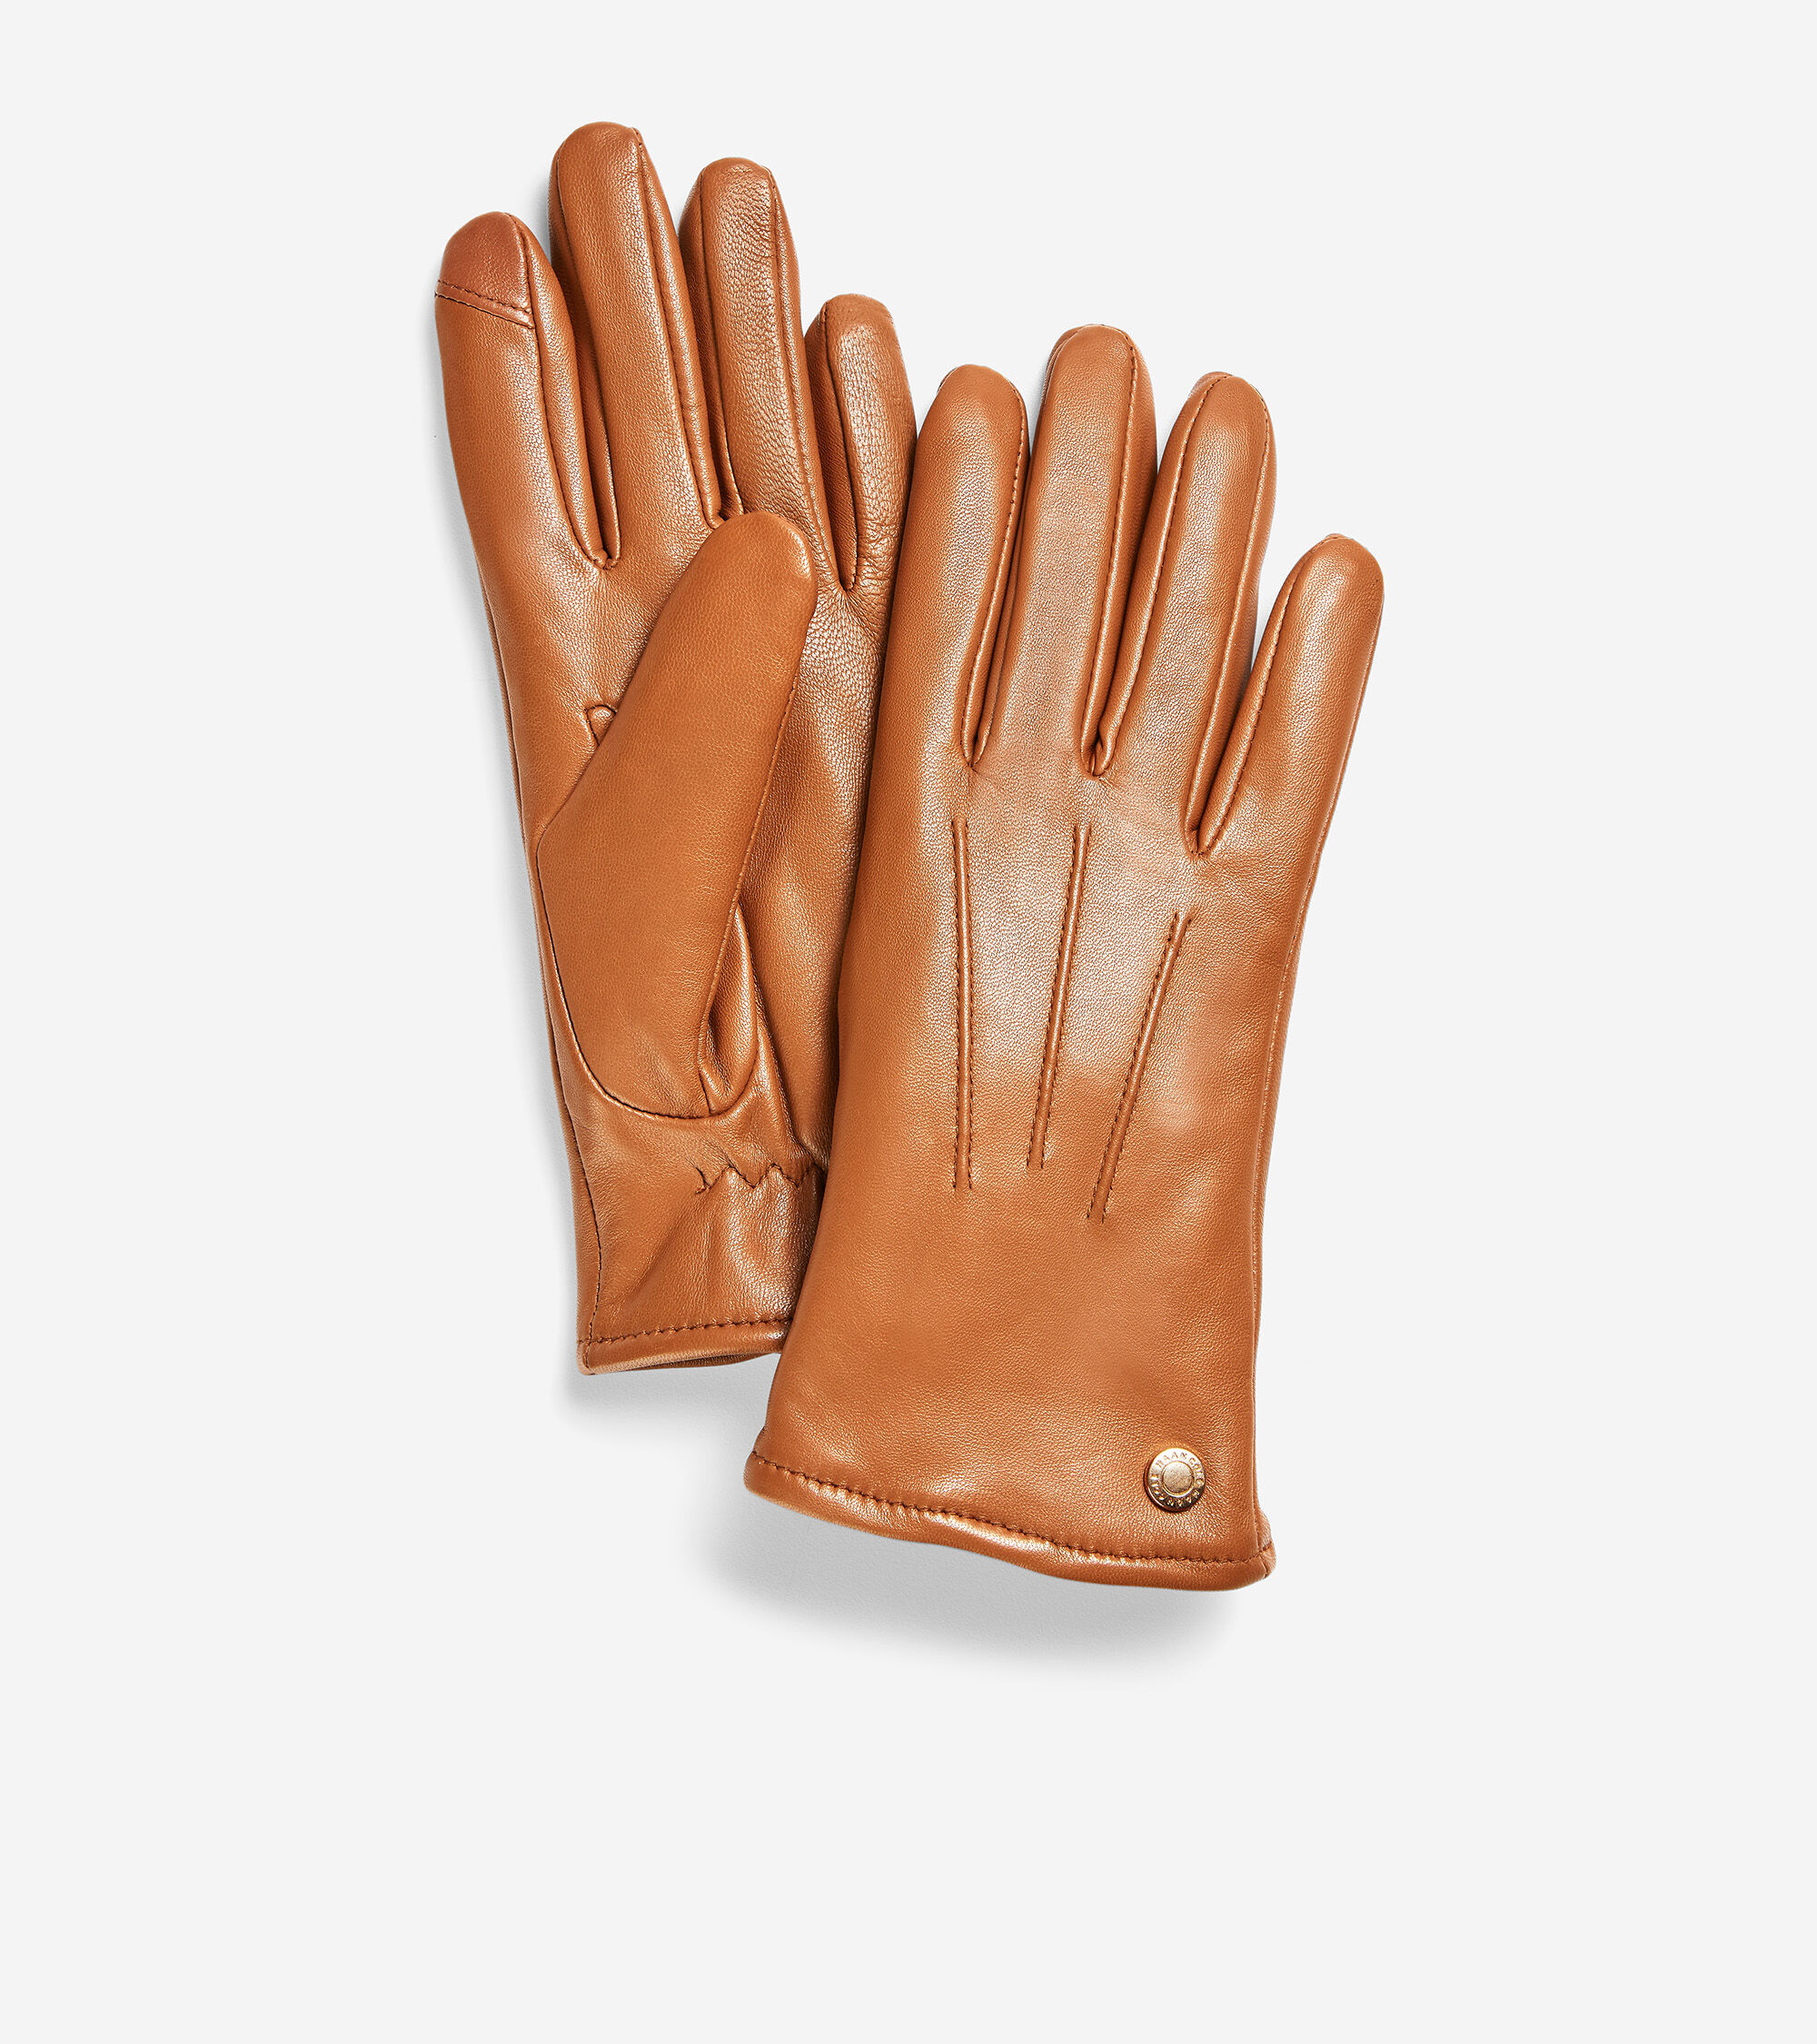 Details about   Men's Cole Haan British Tan Leather Thinsulate Touch Gloves New $125